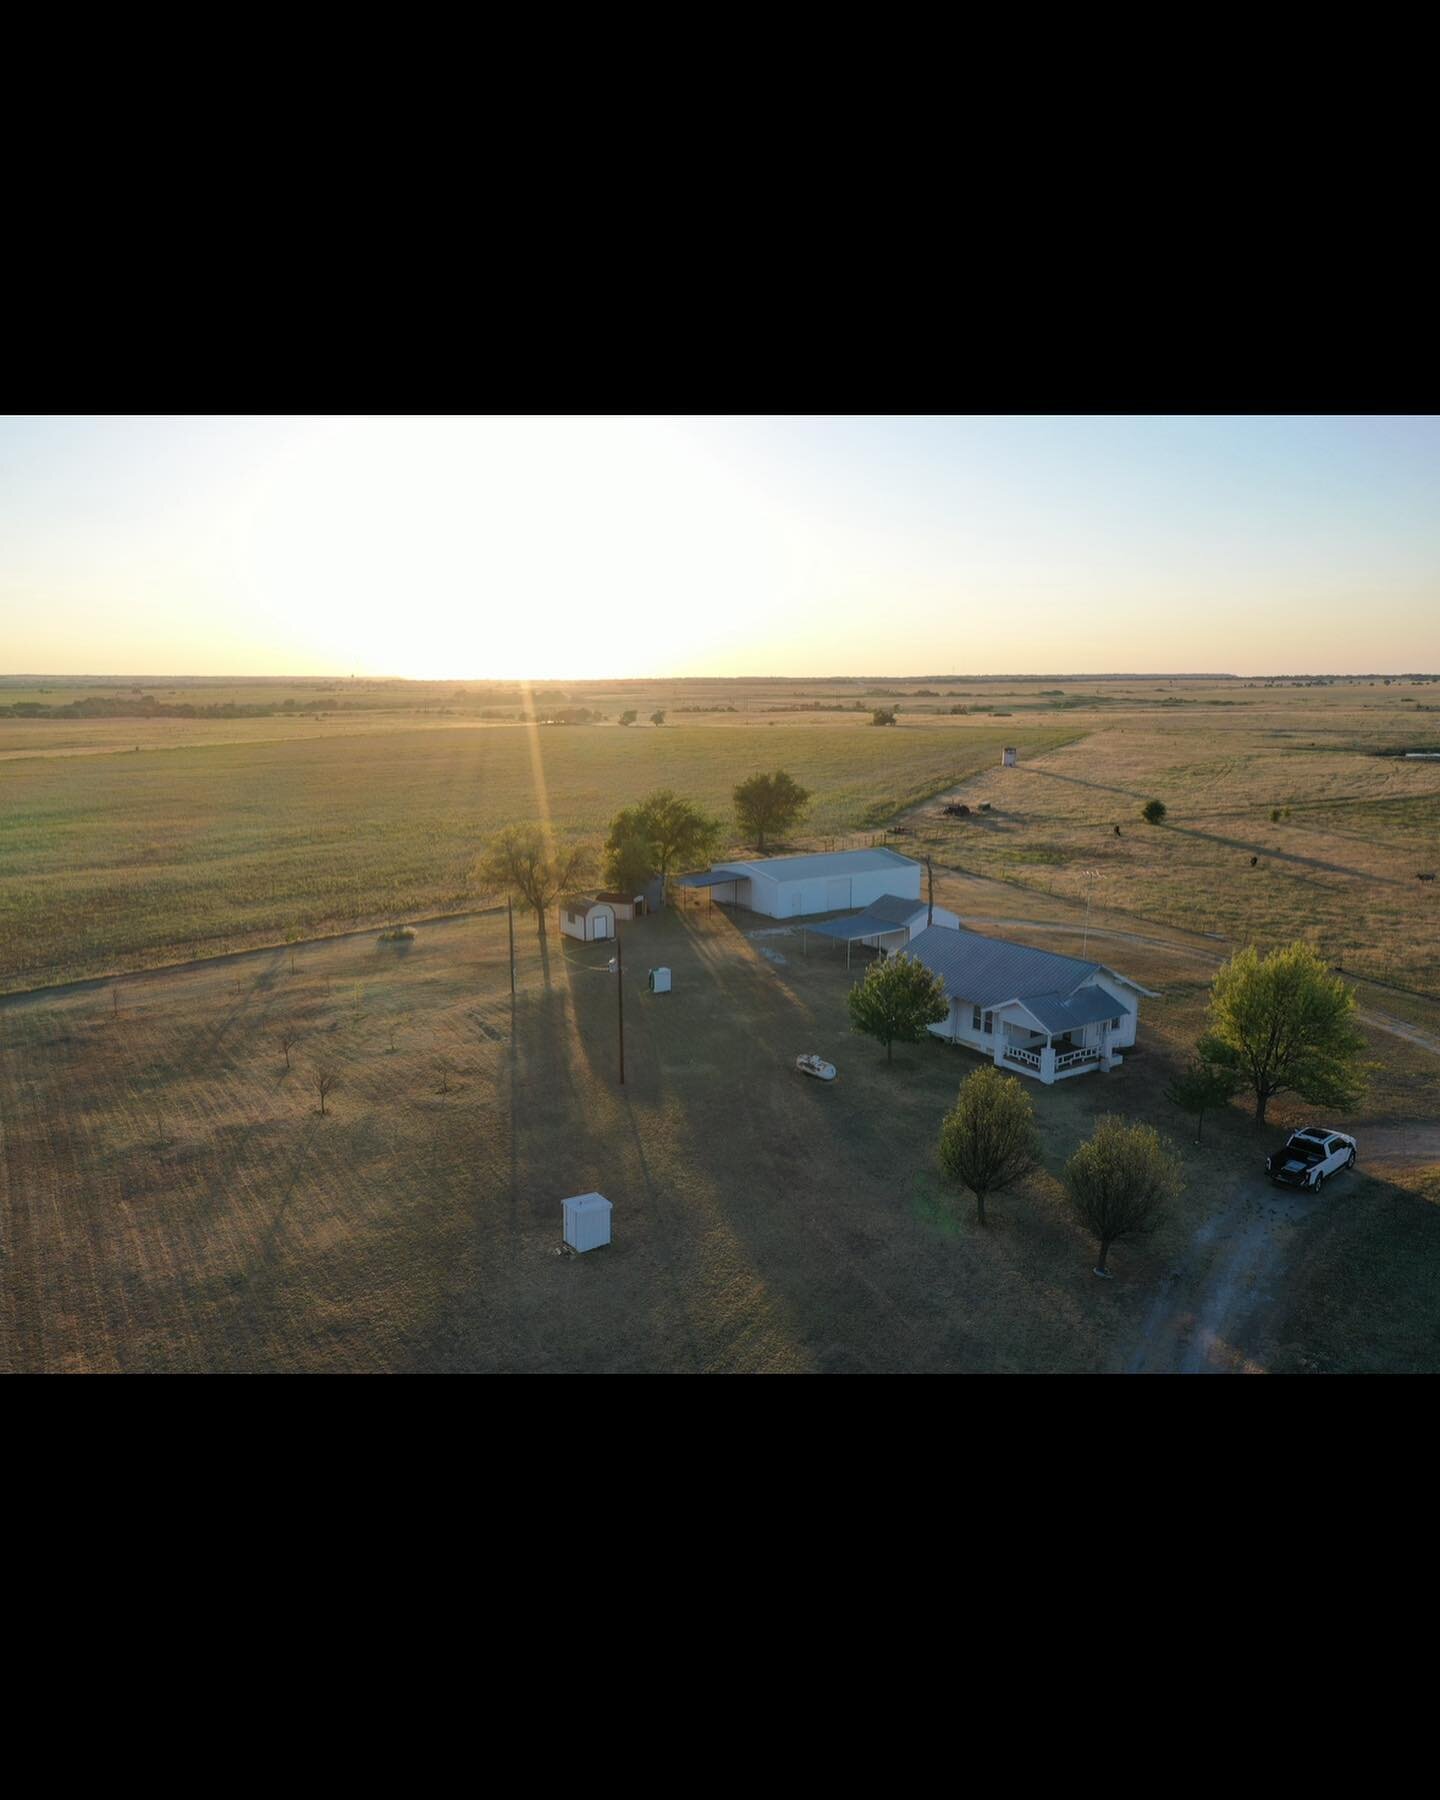 SOLD!! Last week I had the privilege of representing the buyer and seller on the sale of this 107 acre property in Muenster, TX. It was an extremely difficult process that took over 8 months with a lot of twists and turns along the way. Multiple movi